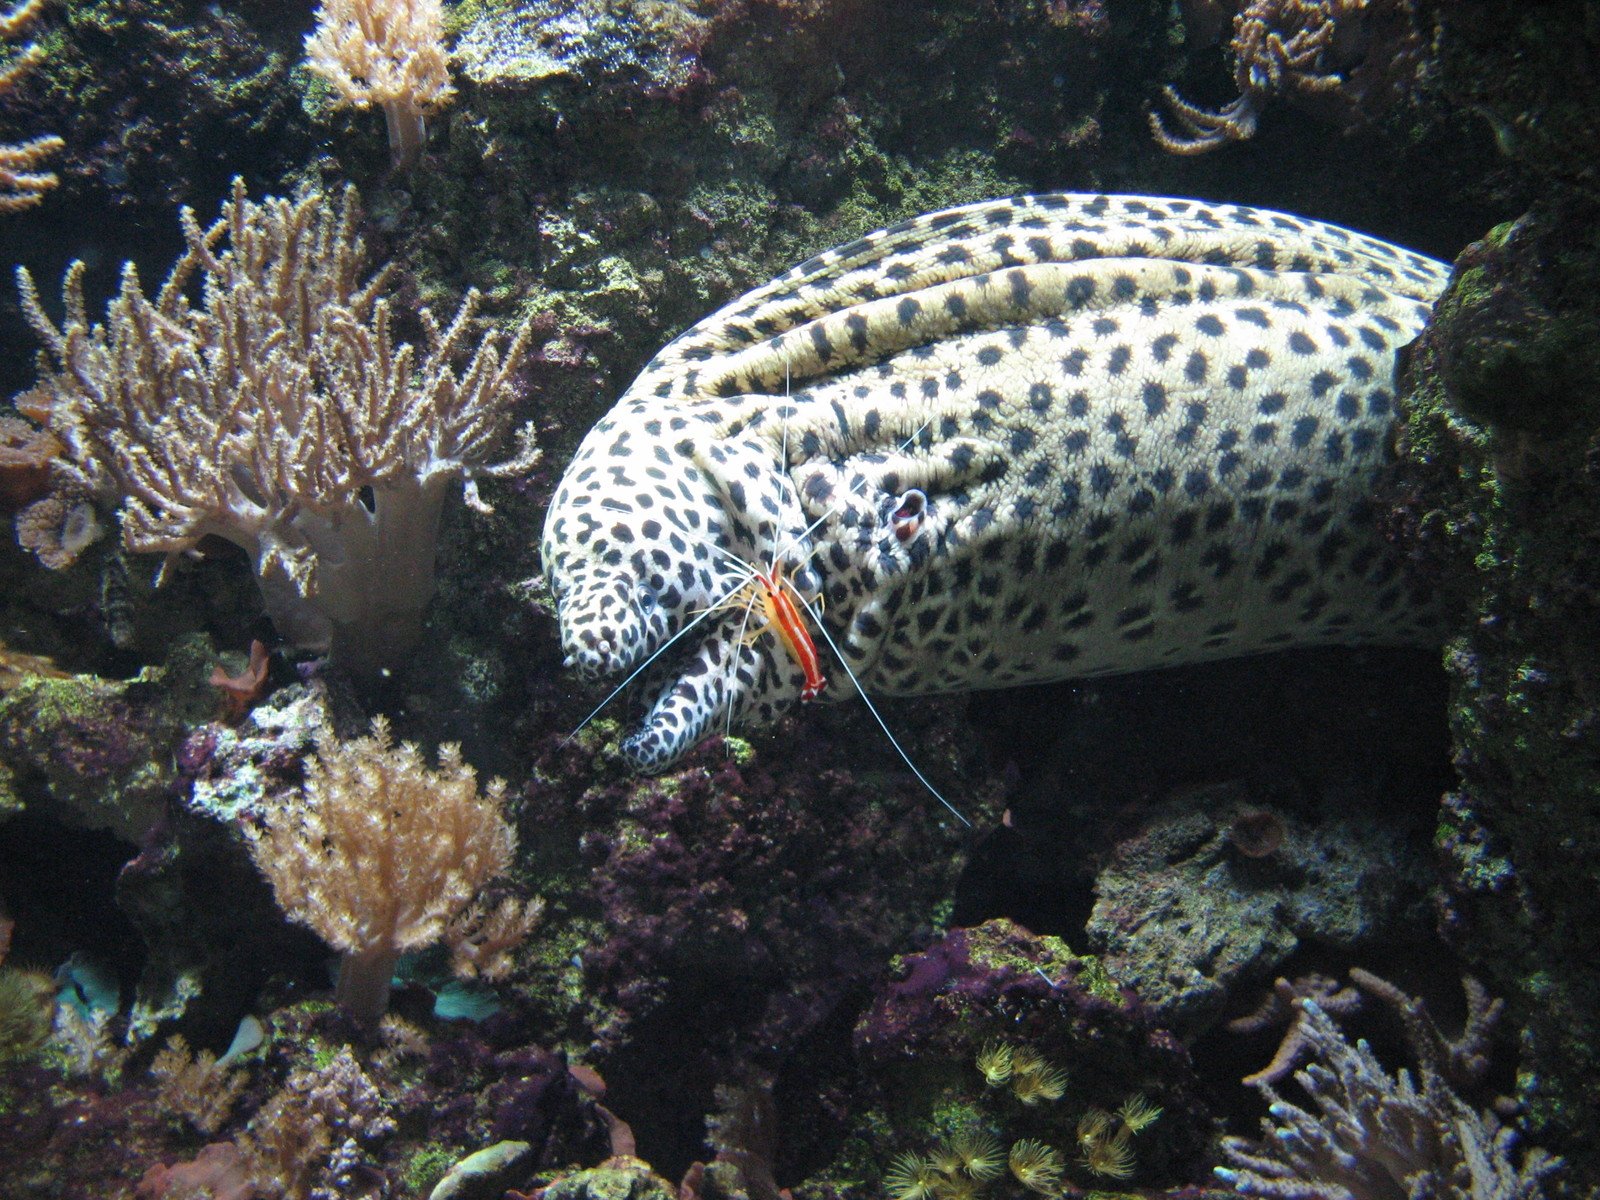 a spotted fish in the water near a reef